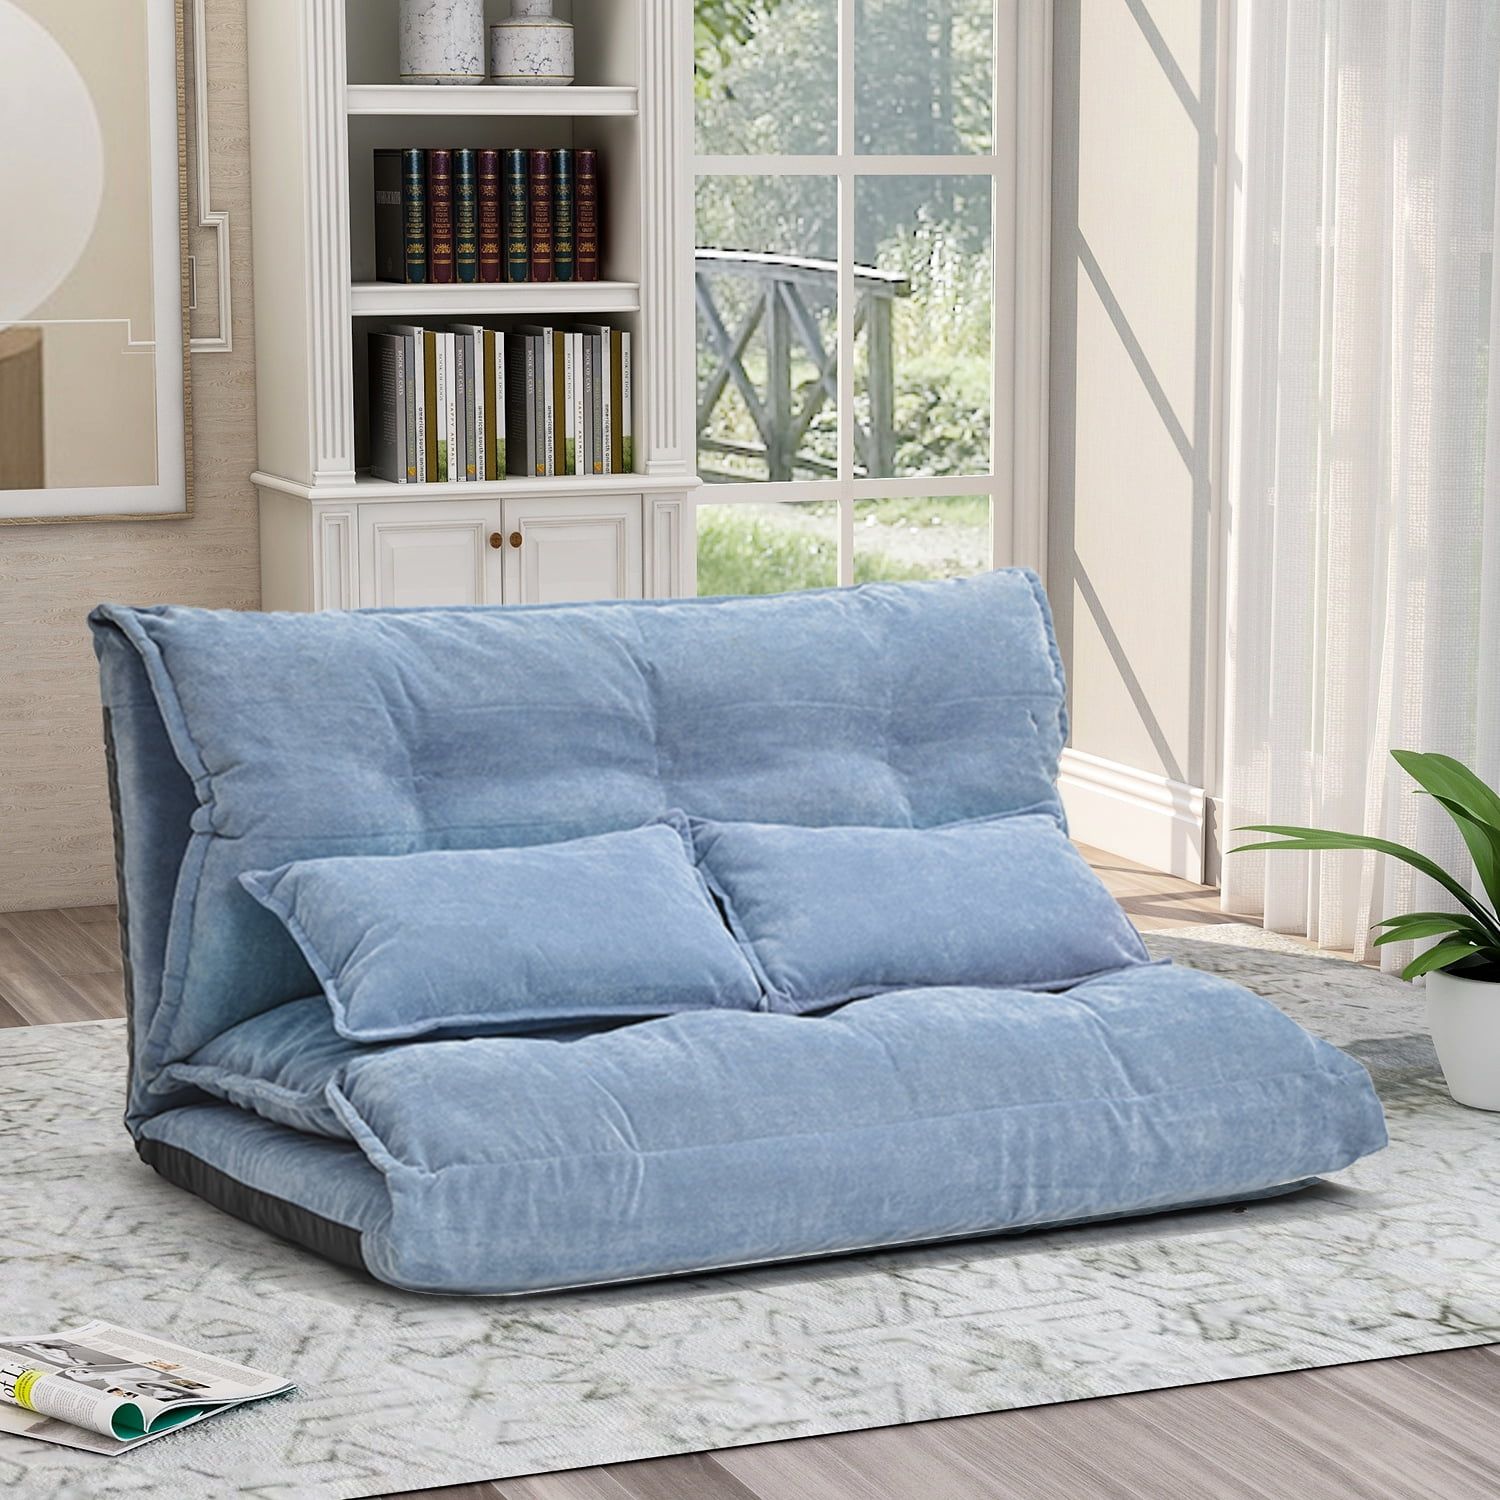 Blue Home Sofa Bed Adjustable Folding Futon Sofa Leisure Sofa Bed With Intended For Adjustable Backrest Futon Sofa Beds (View 17 of 20)